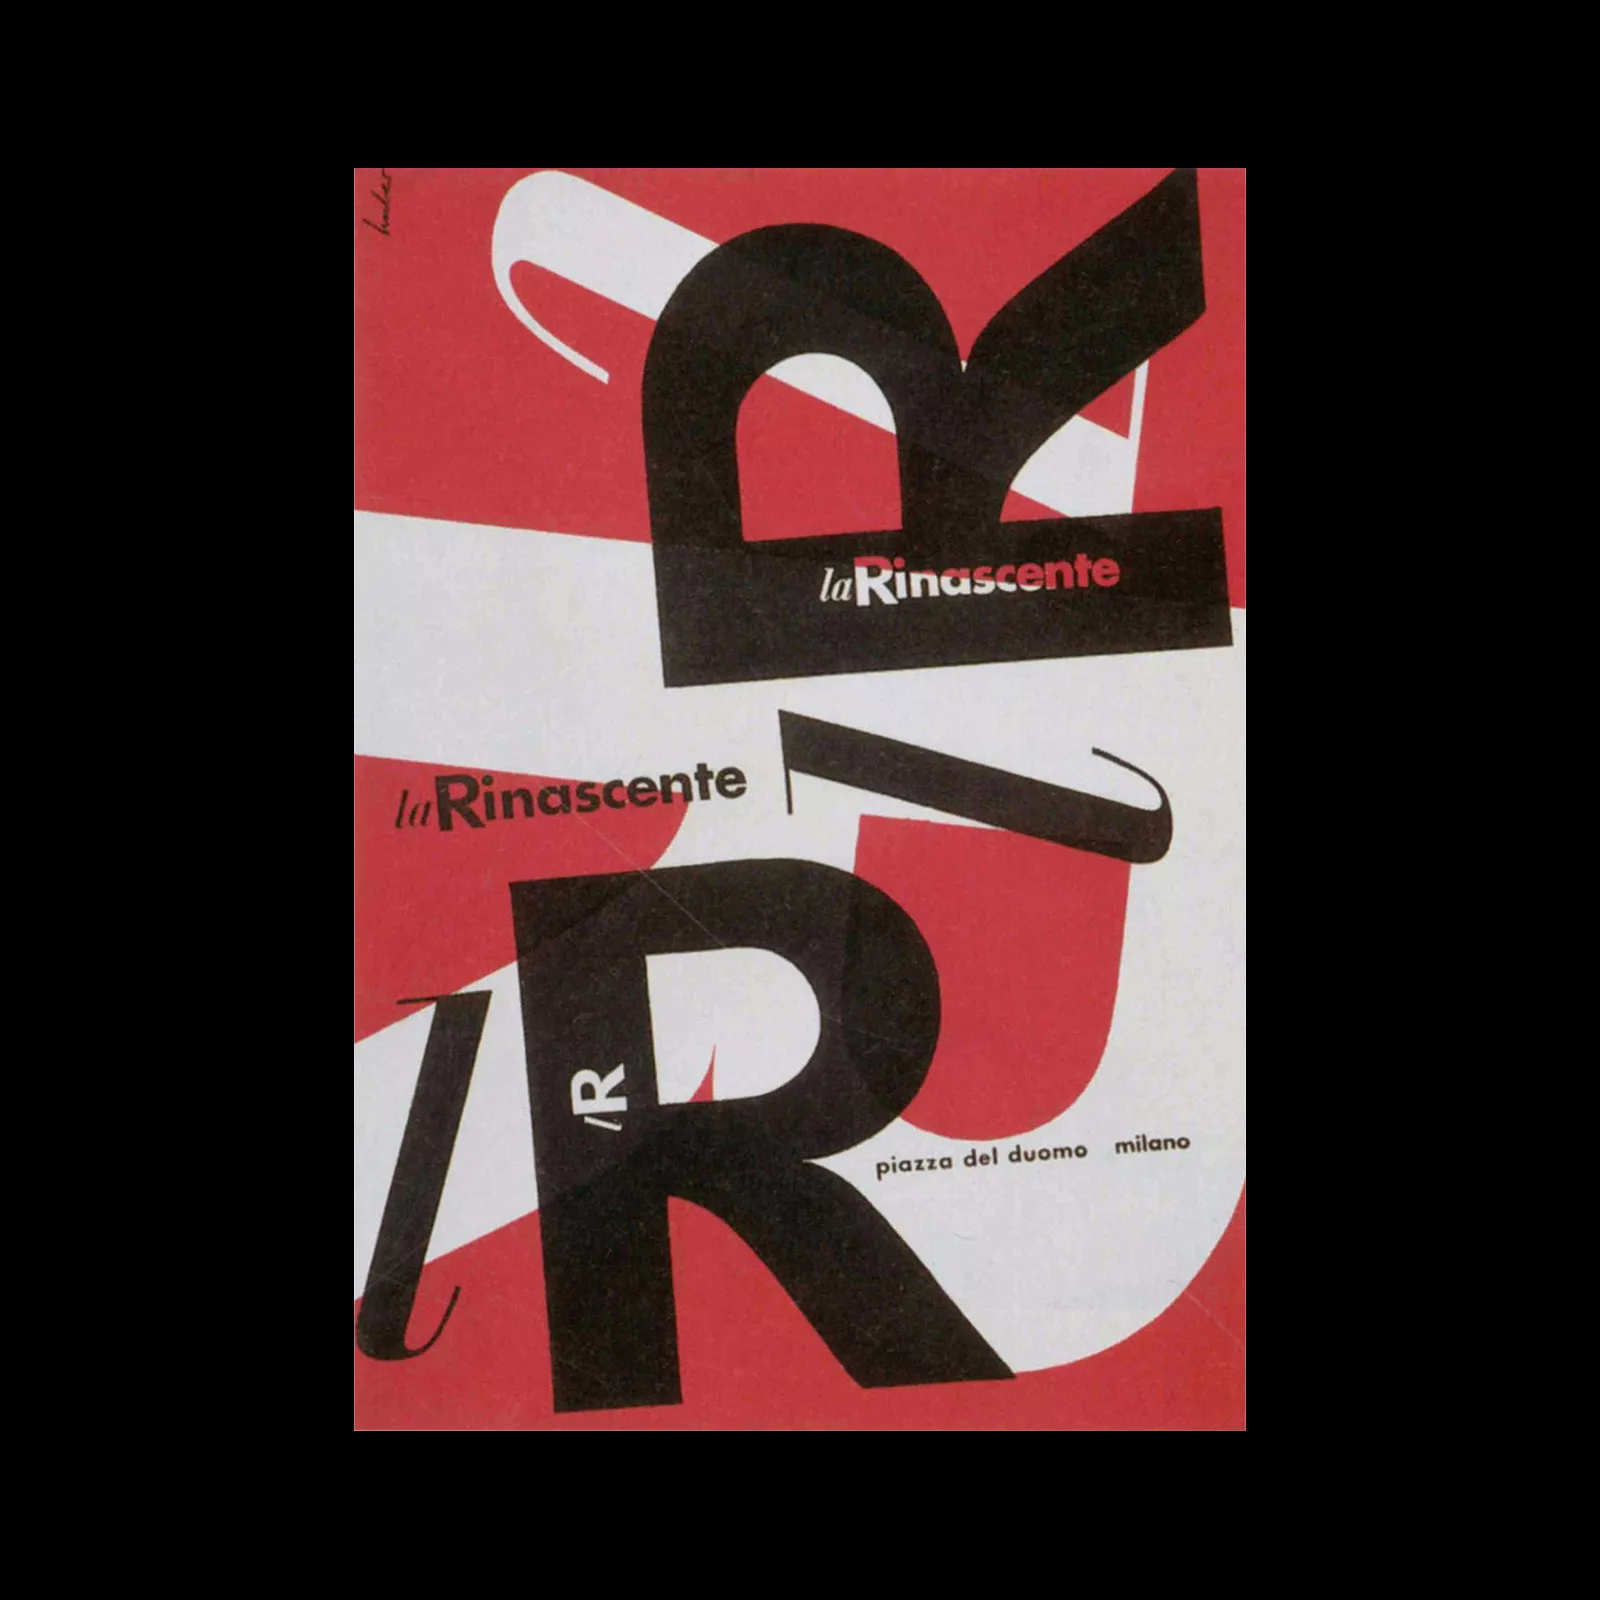 La Rinascente, Brochure, 1951. Designed by Max Huber. Scanned from Max Huber, Phaidon Press, 2006